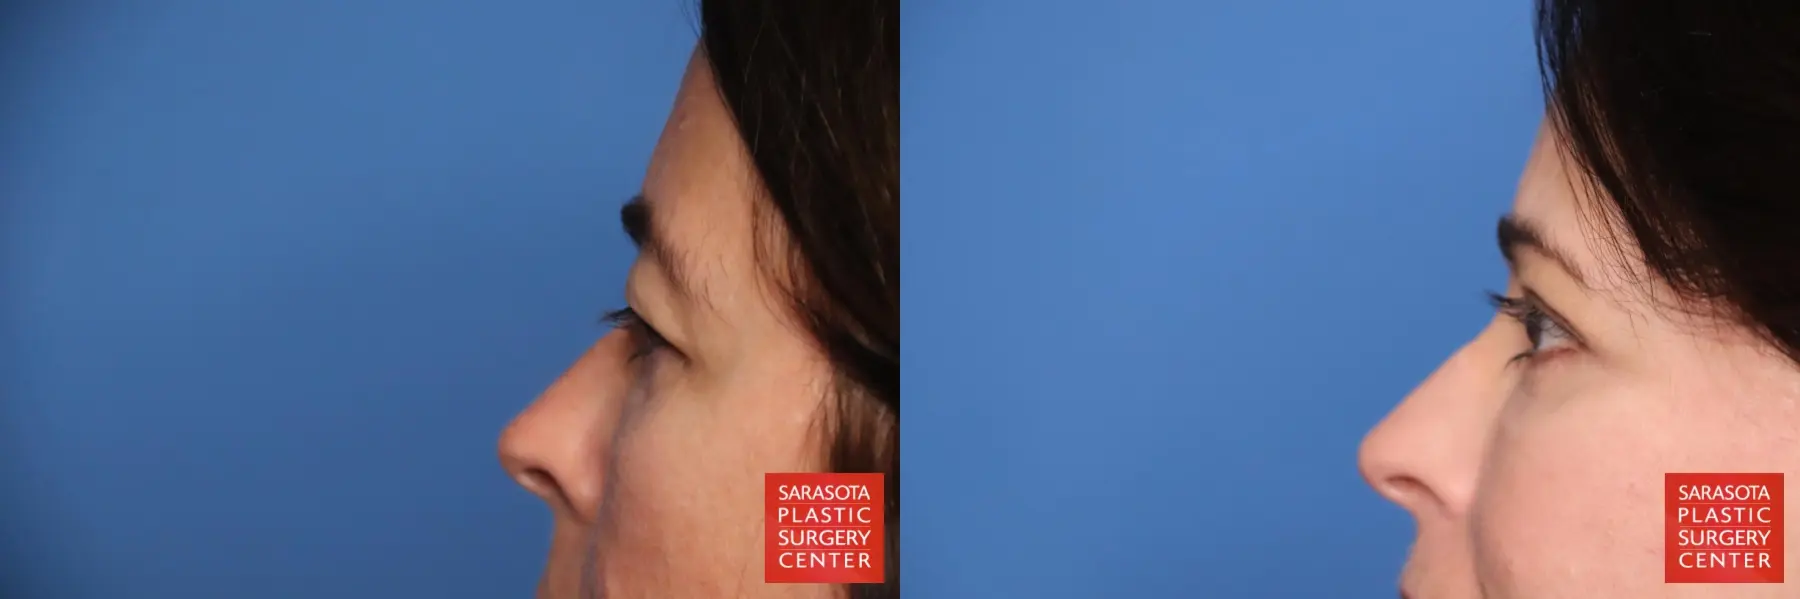 Eyelid Lift: Patient 3 - Before and After 5